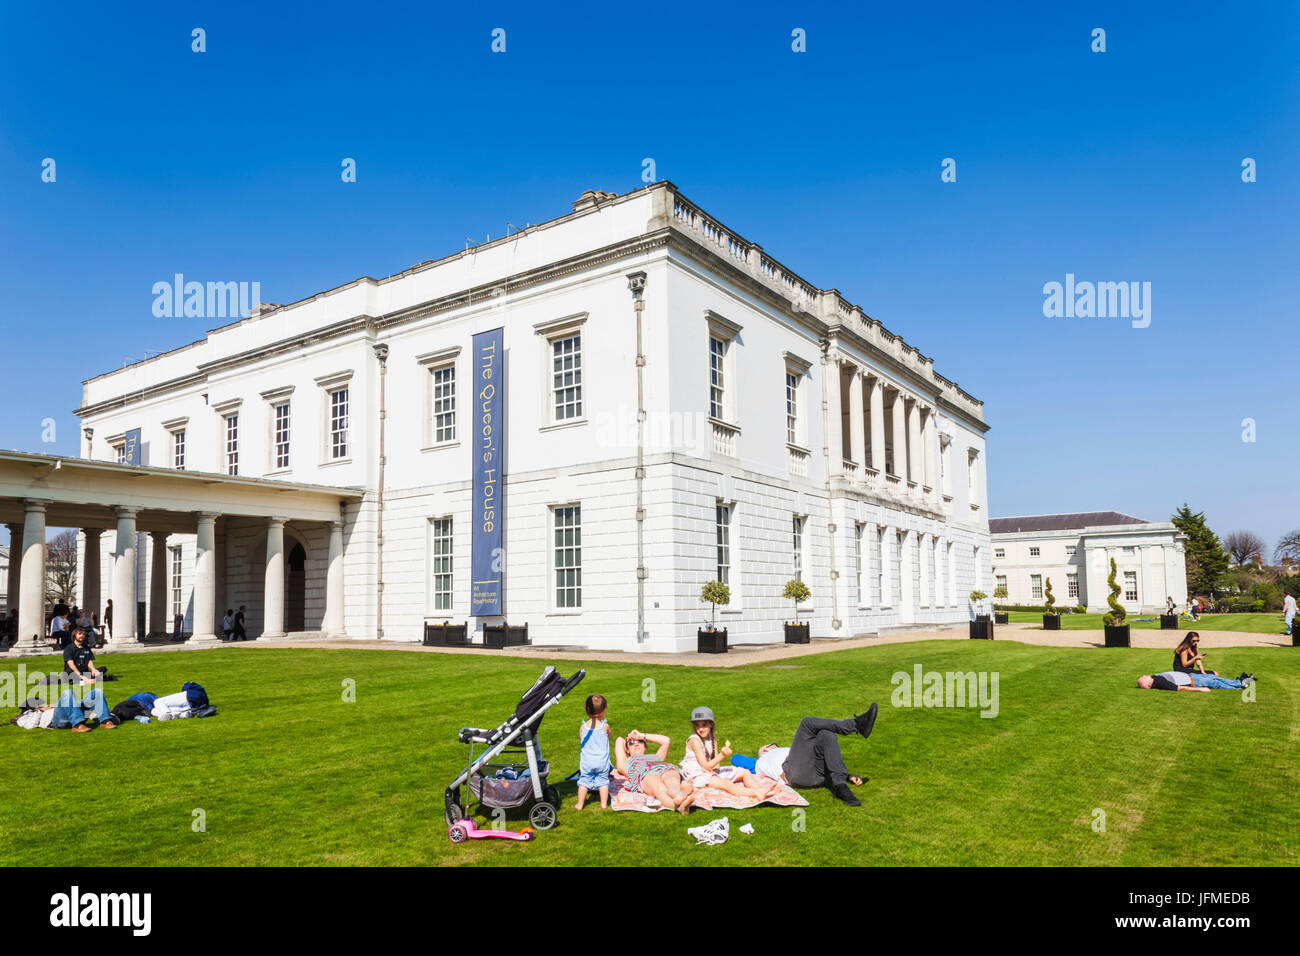 England, London, Greenwich, The Queen's House Stock Photo